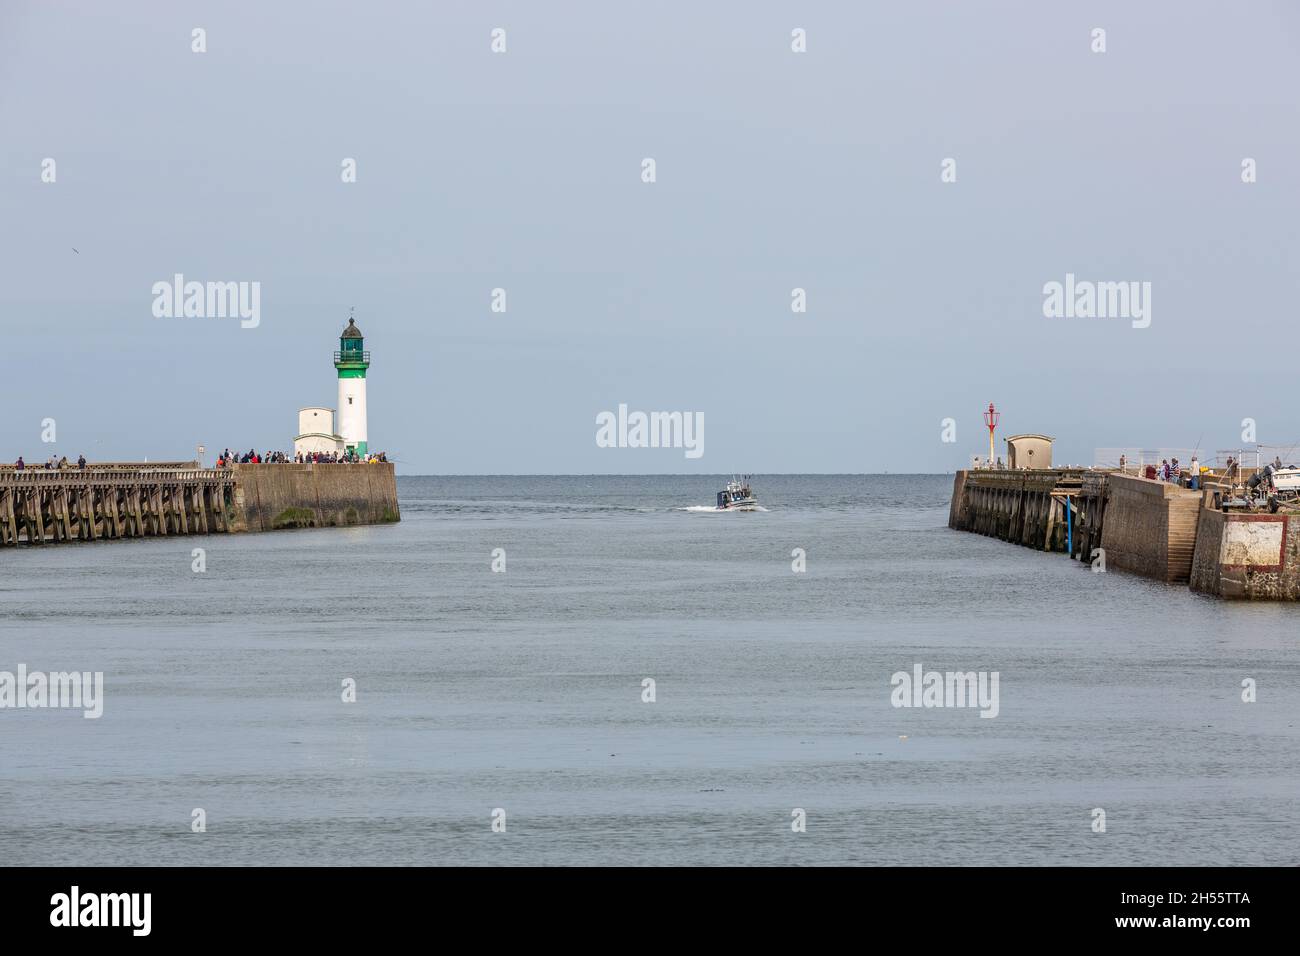 Access to the port of Le Tréport, jetty and dike. Le Tréport, France Stock Photo